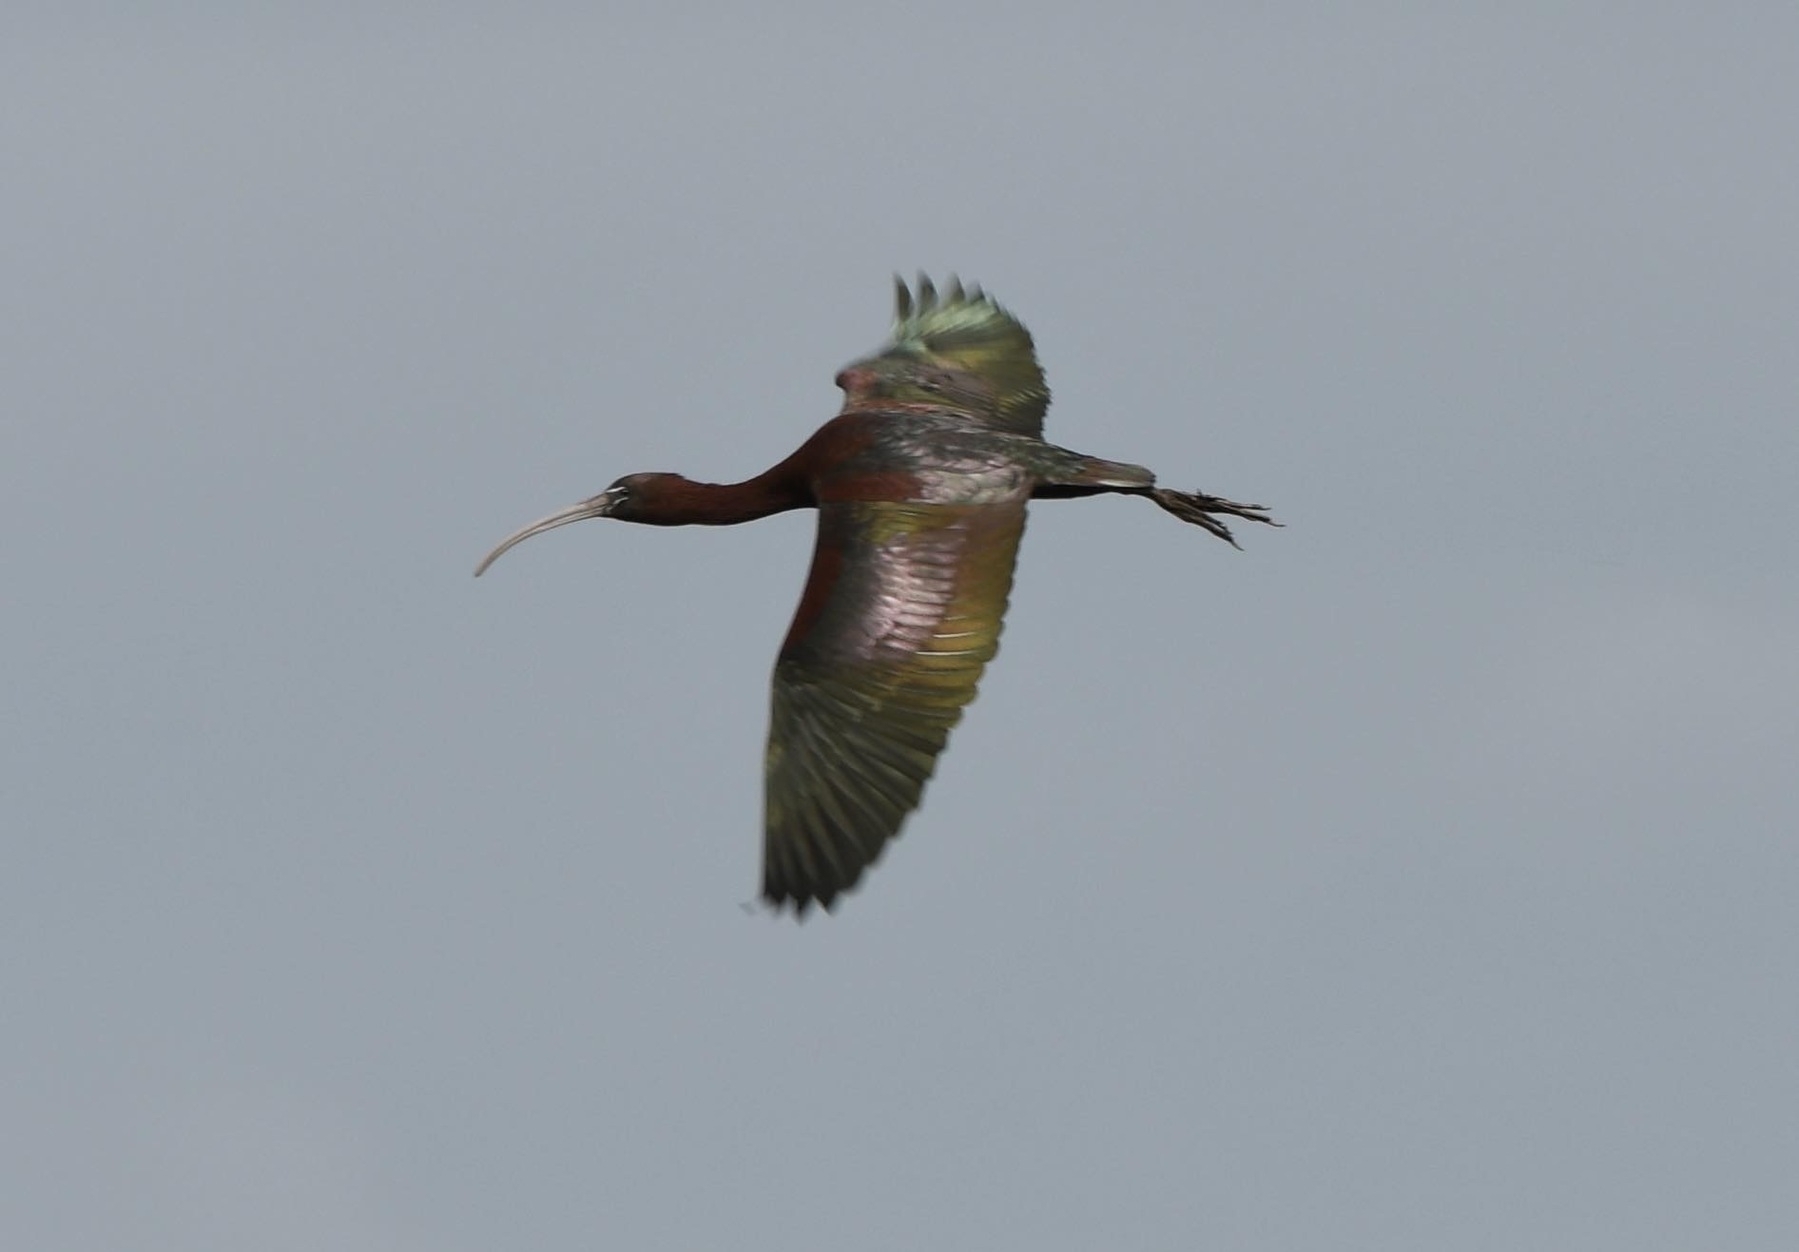 Glossy Ibis in flight. Photo by Kezna Cameron and used with permission.